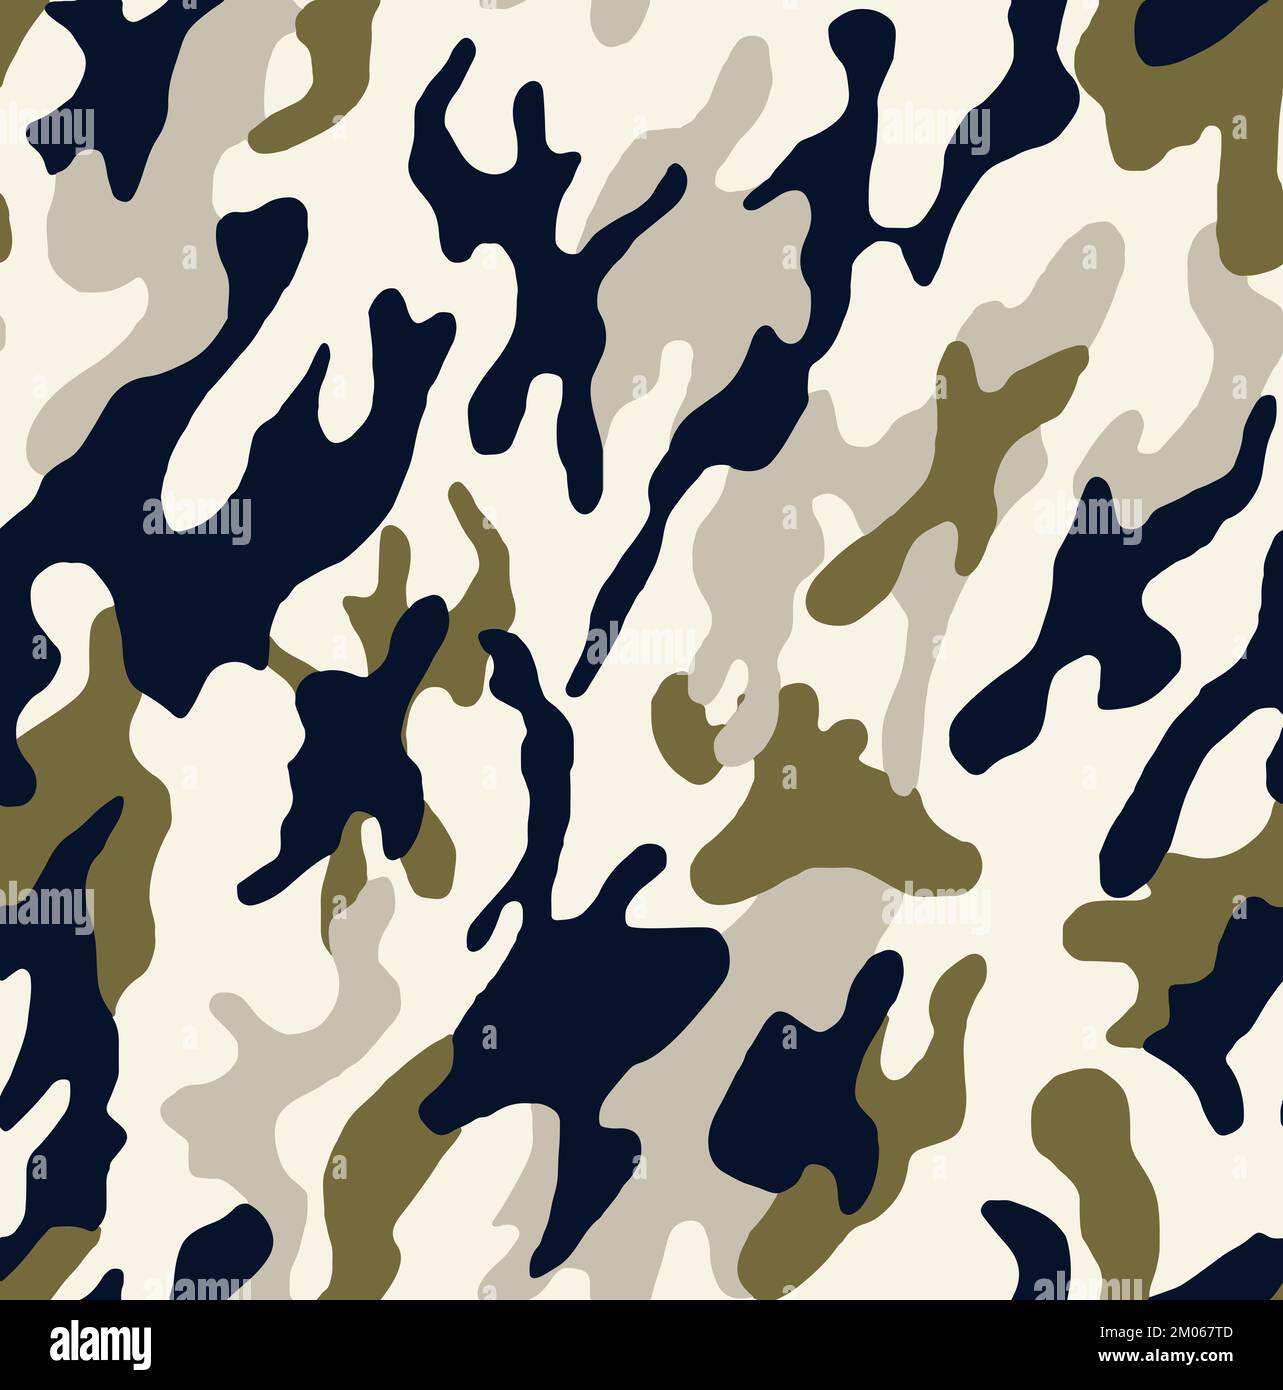 Seamless Army Camouflage, Colored Military Background Ready for Textile Prints. Stock Photo